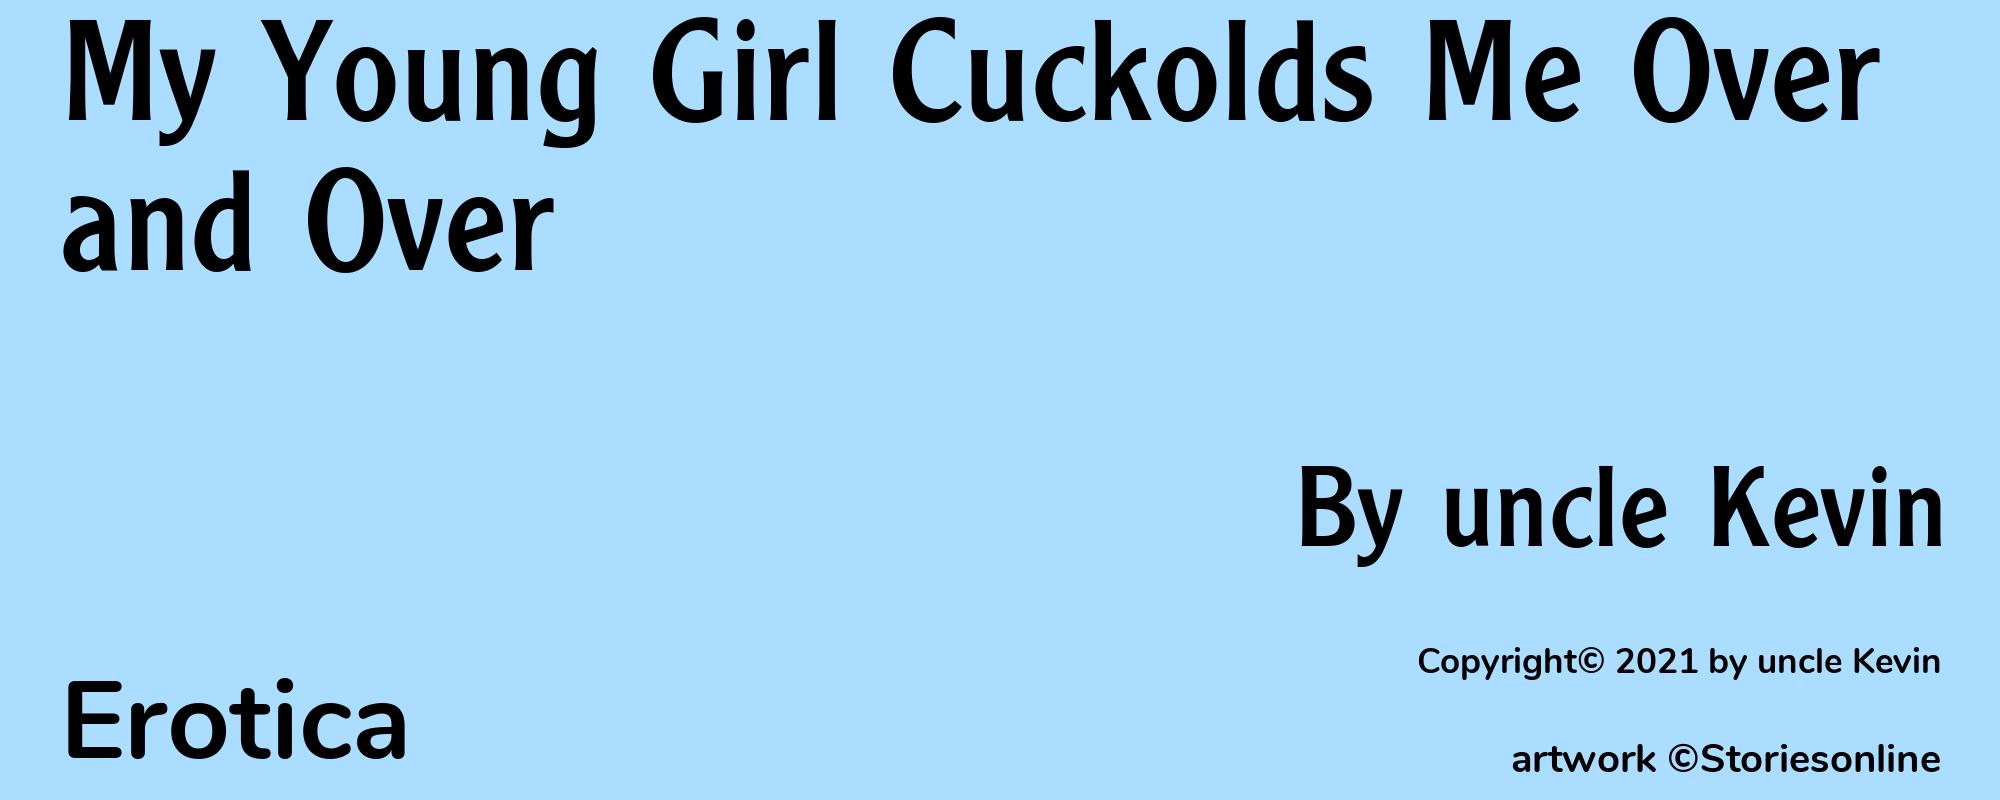 My Young Girl Cuckolds Me Over and Over - Cover